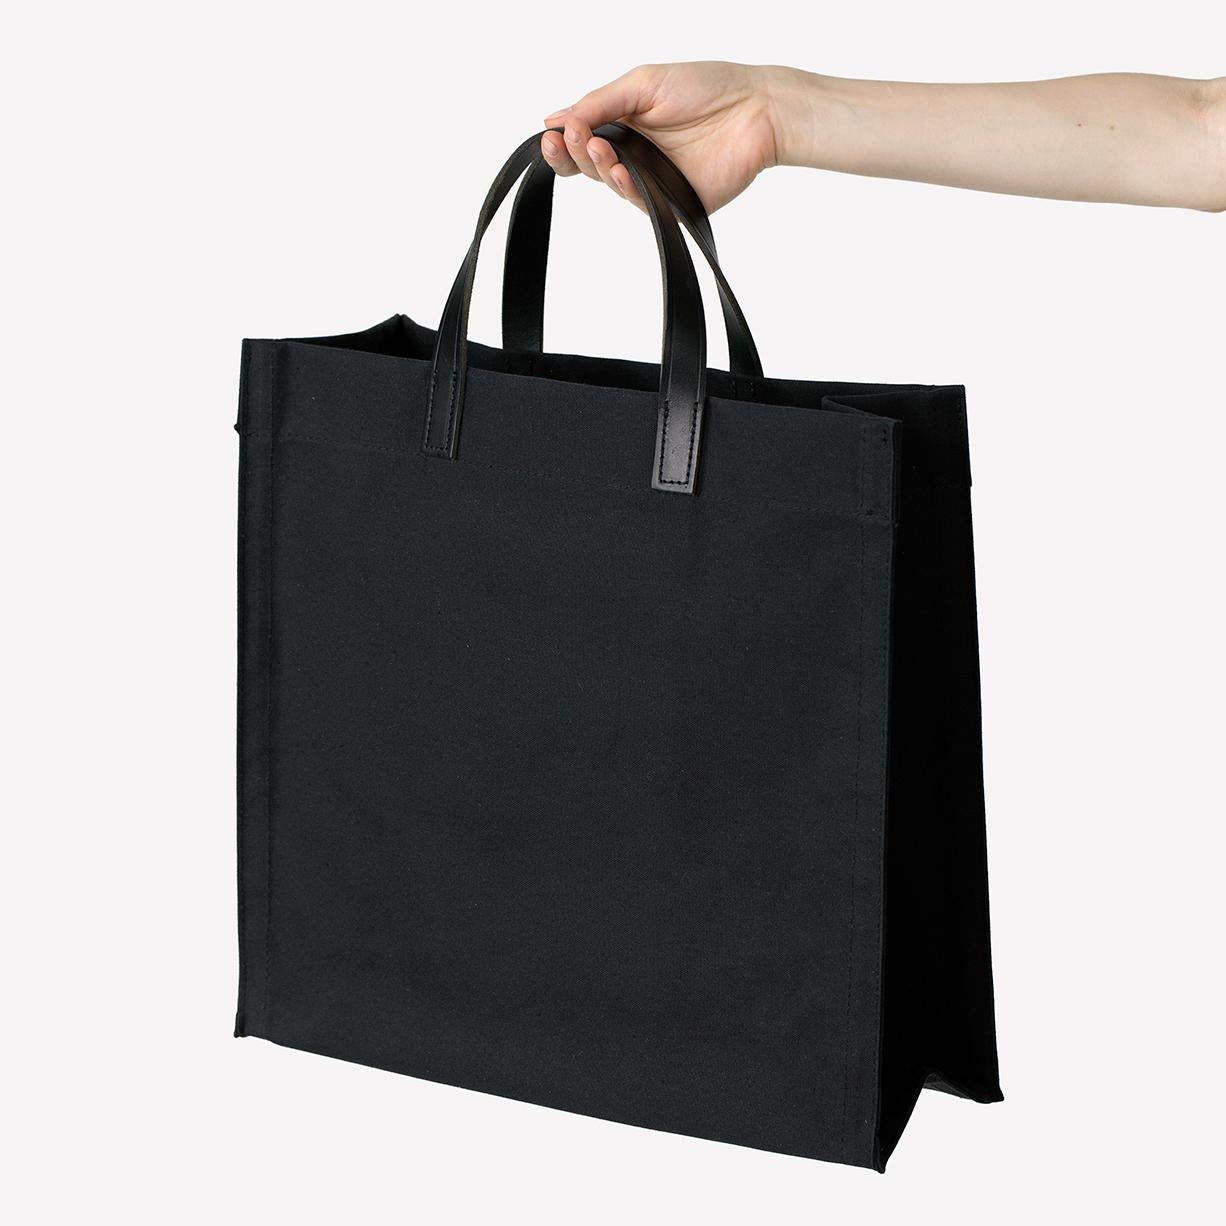 Maharam Bag
Amsterdam 
001 Black/Black

Waxed cotton canvas with leather handles. One interior pocket. Light and dark variation is inherent to this waterproof textile.

Clean with damp cloth.

15 1/2